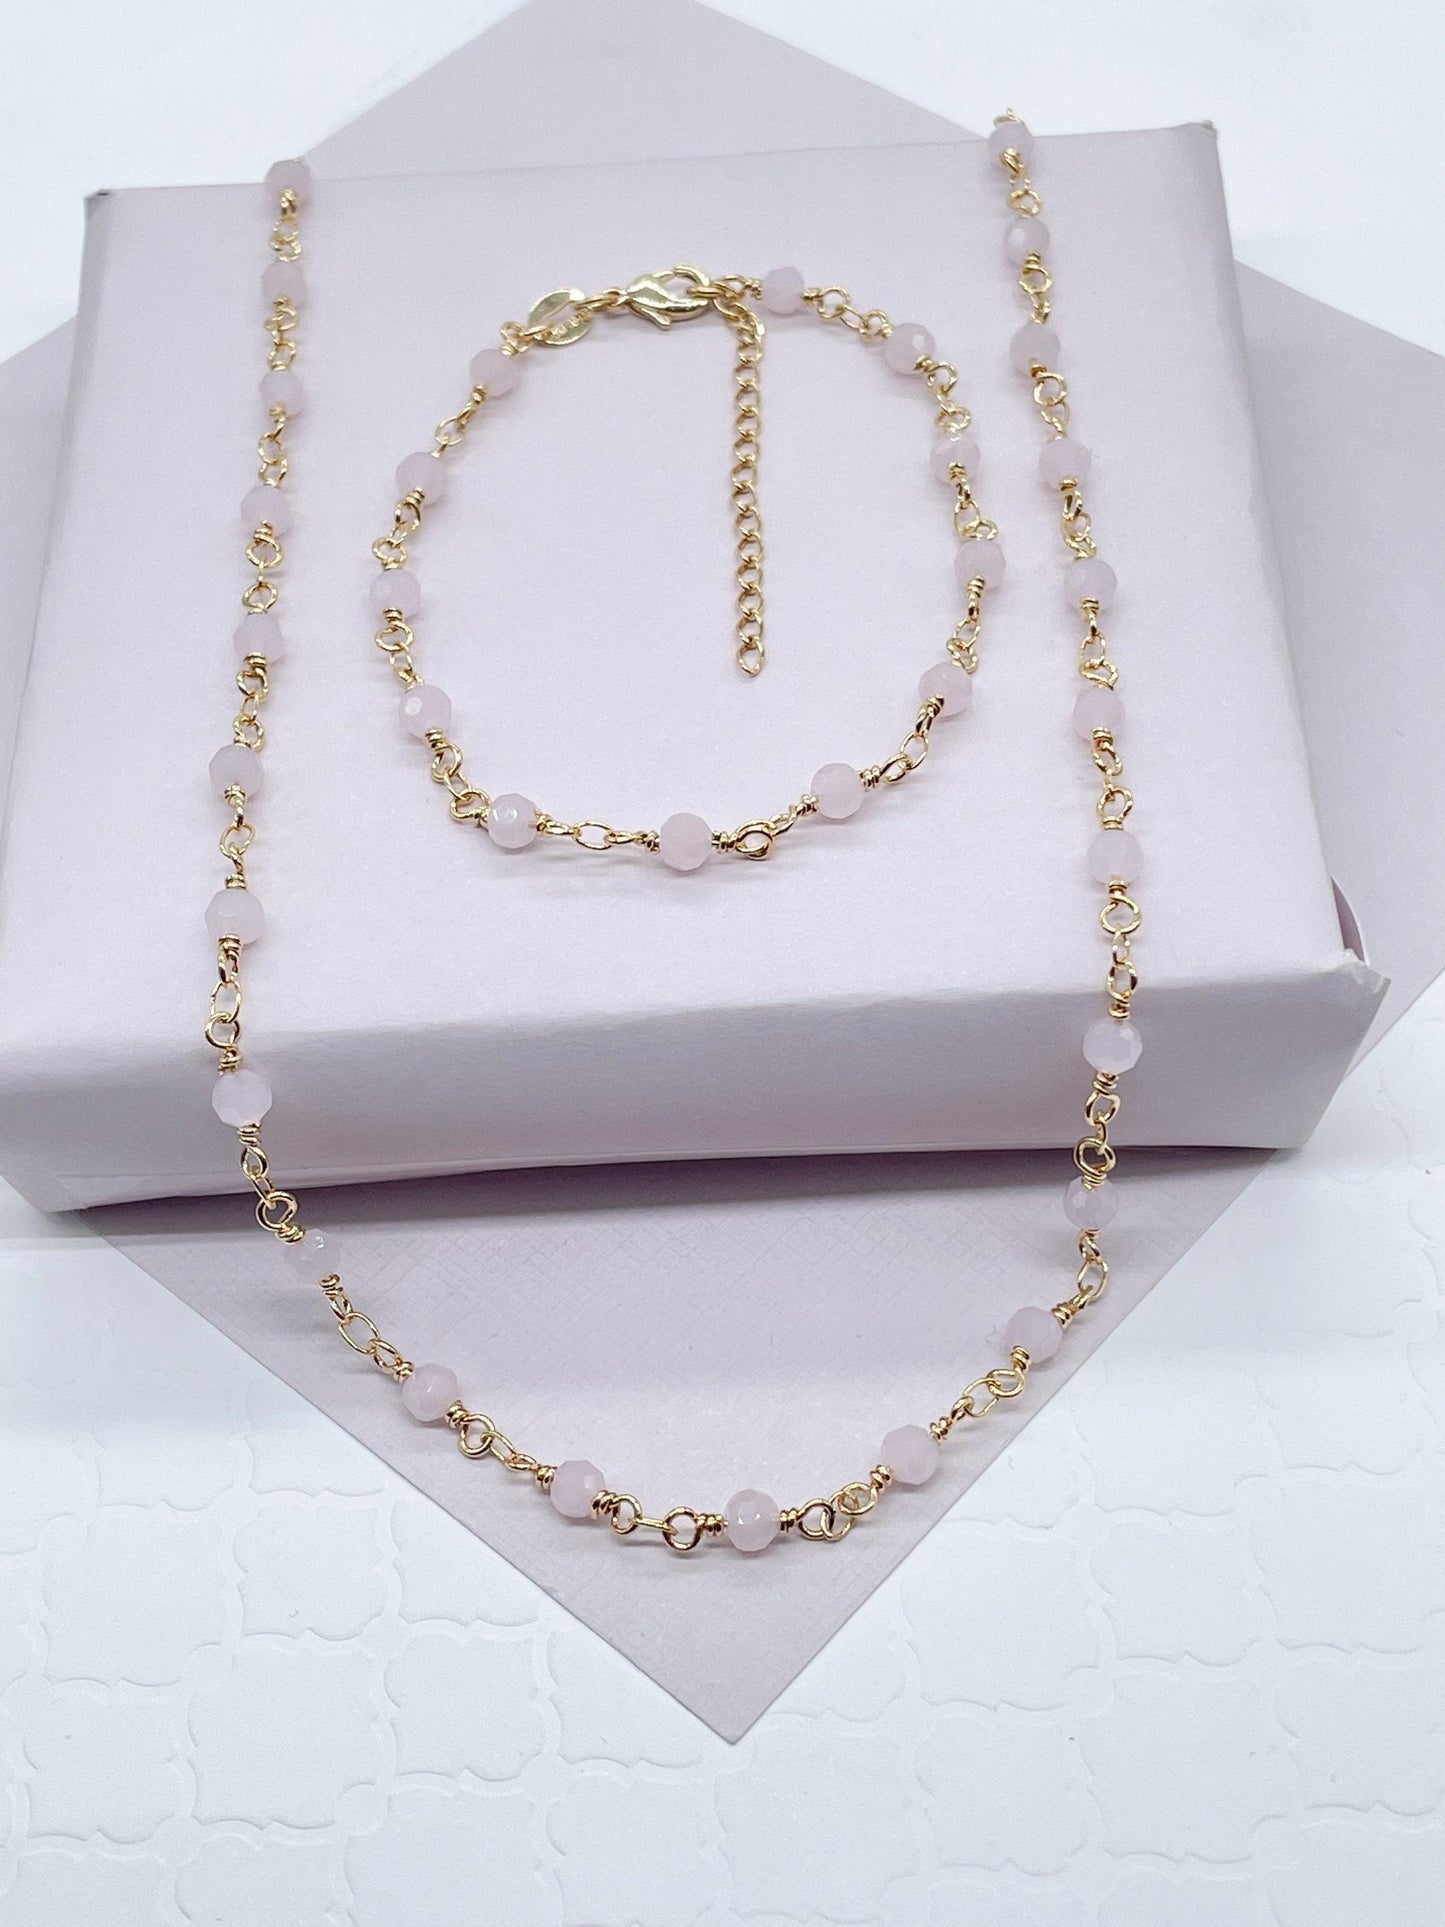 18k Gold Filled Baby Pink Bead Bracelet Necklace Or Jewelry Set, Delicate Beaded